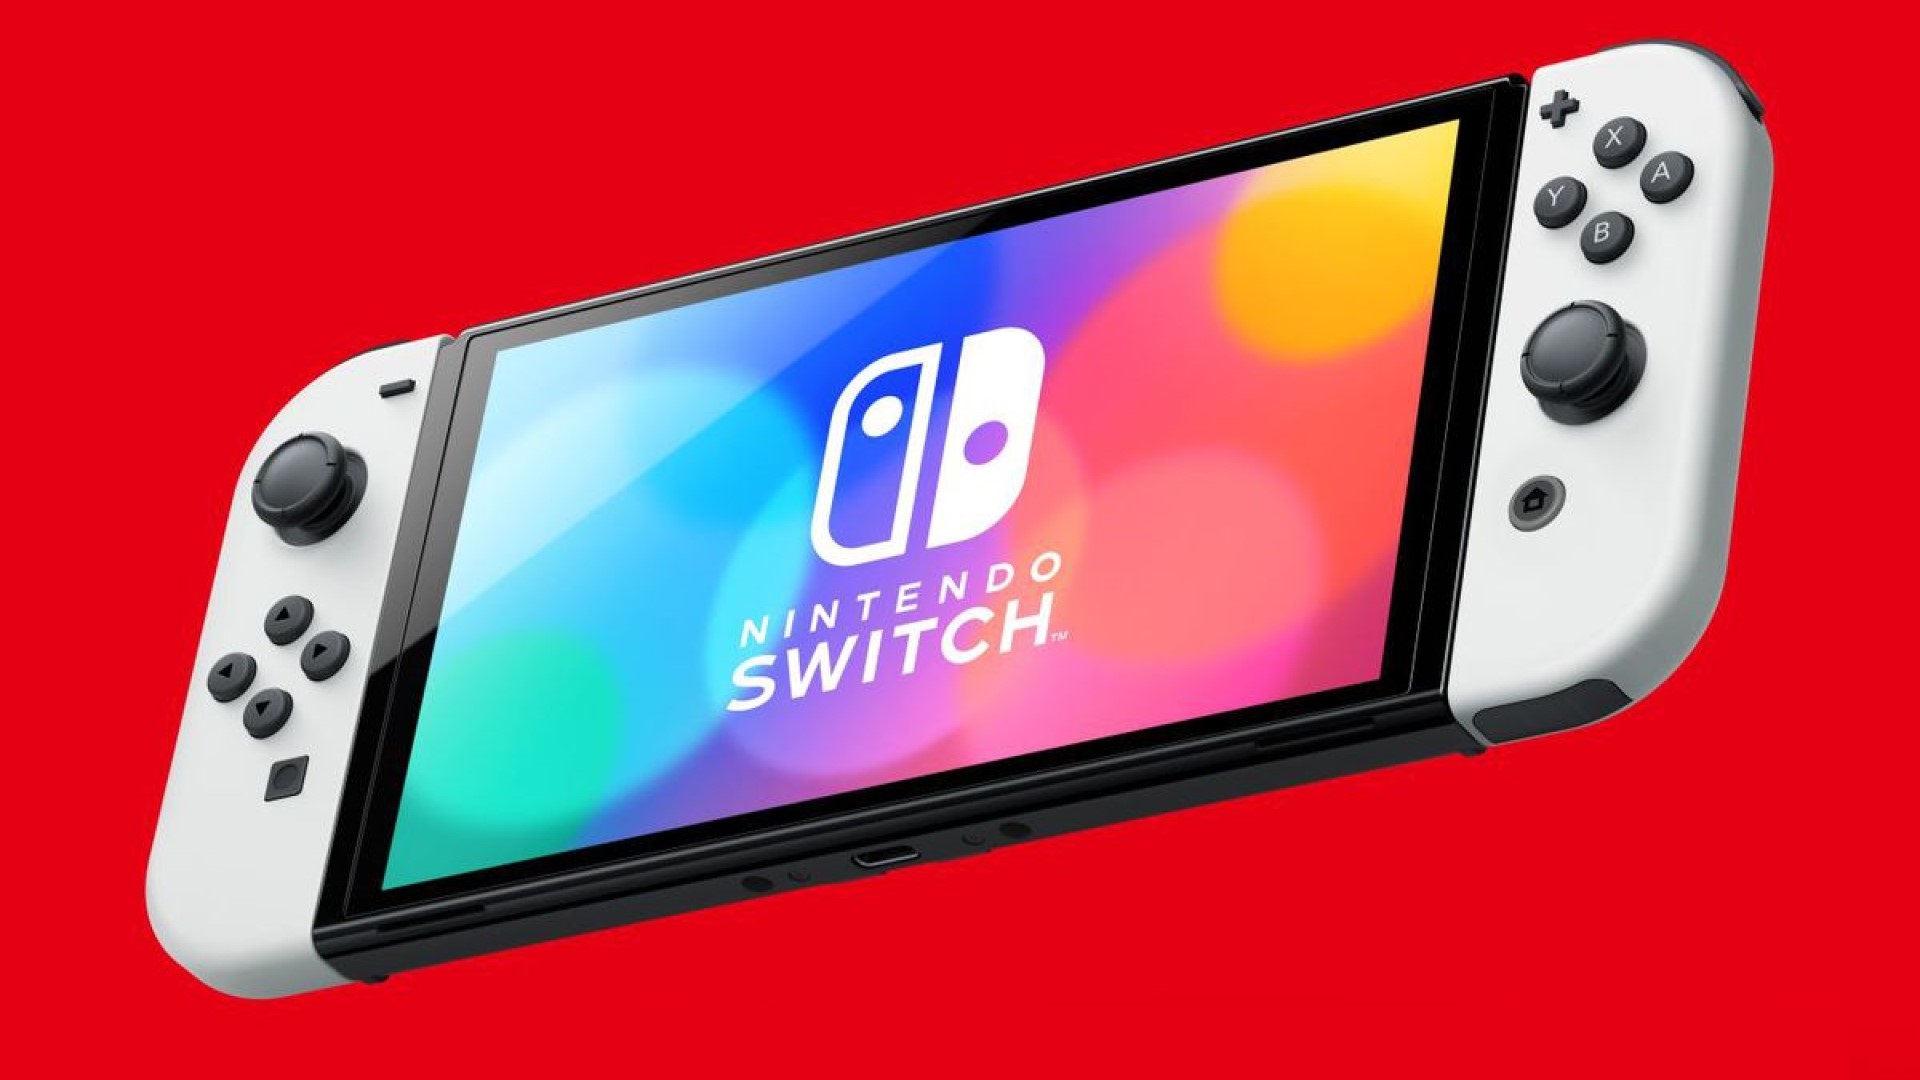 Nintendo Switch 2 Will Launch This Year with a Custom Nvidia Chip – Rumour